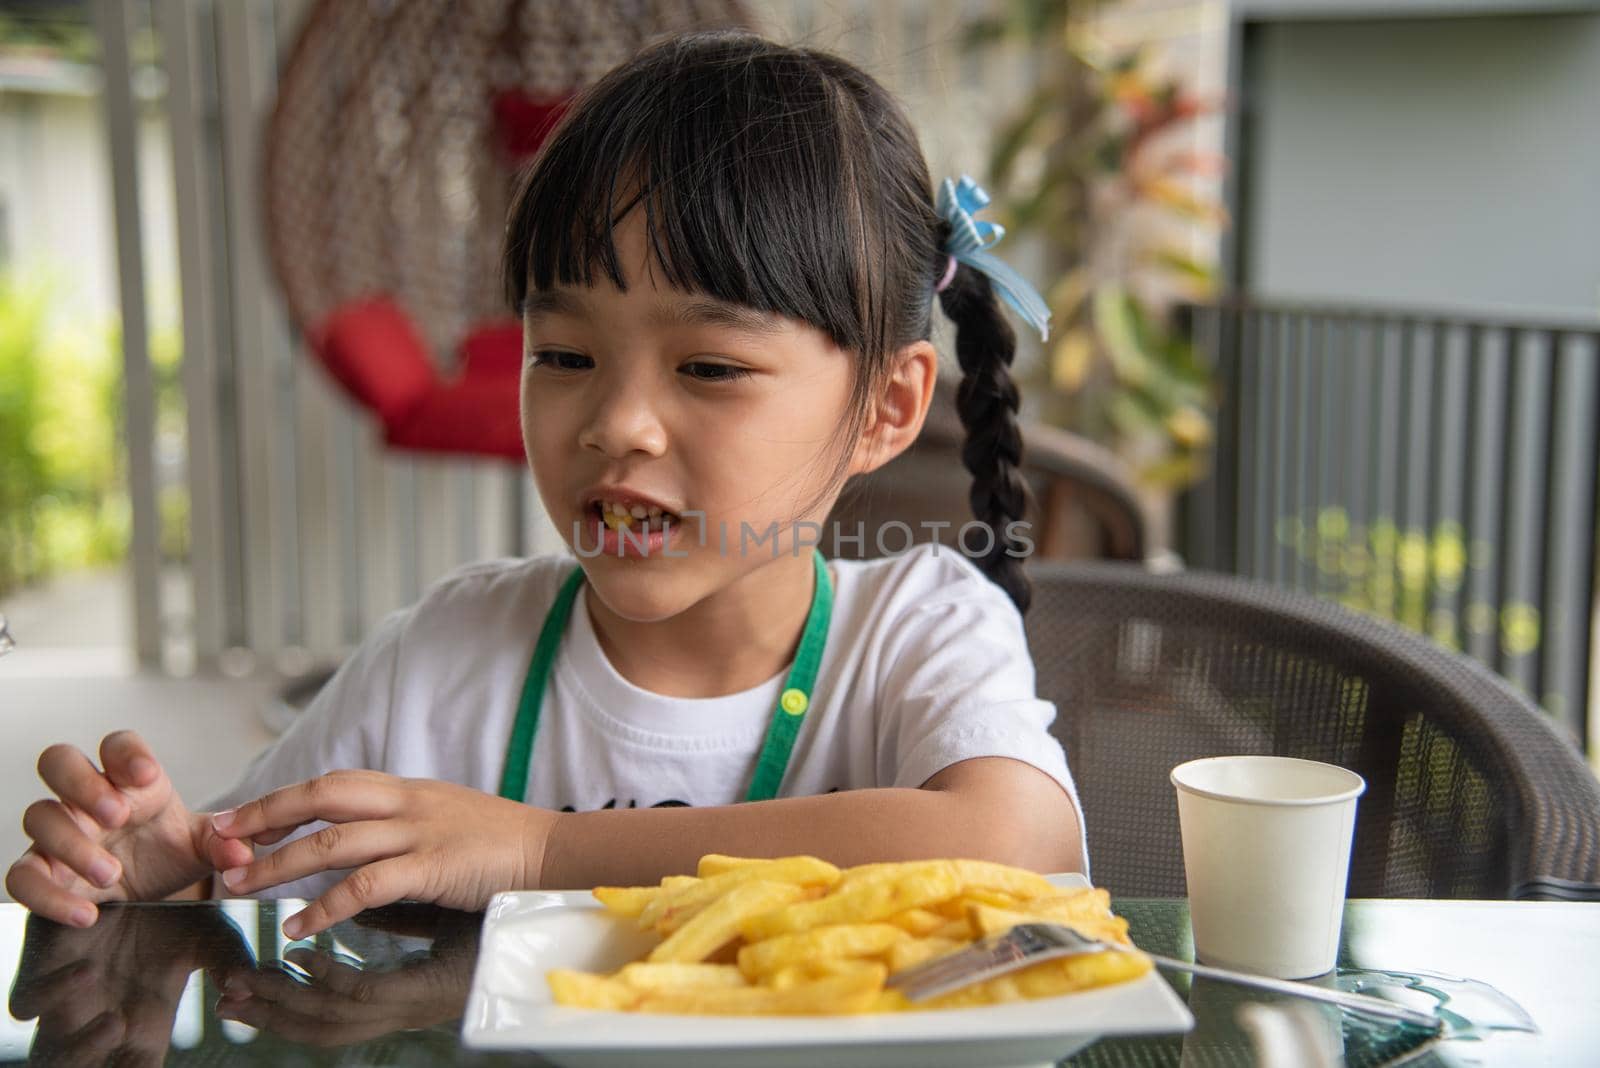 Young Asian girl eating french fries young kid fun happy potato fast food.